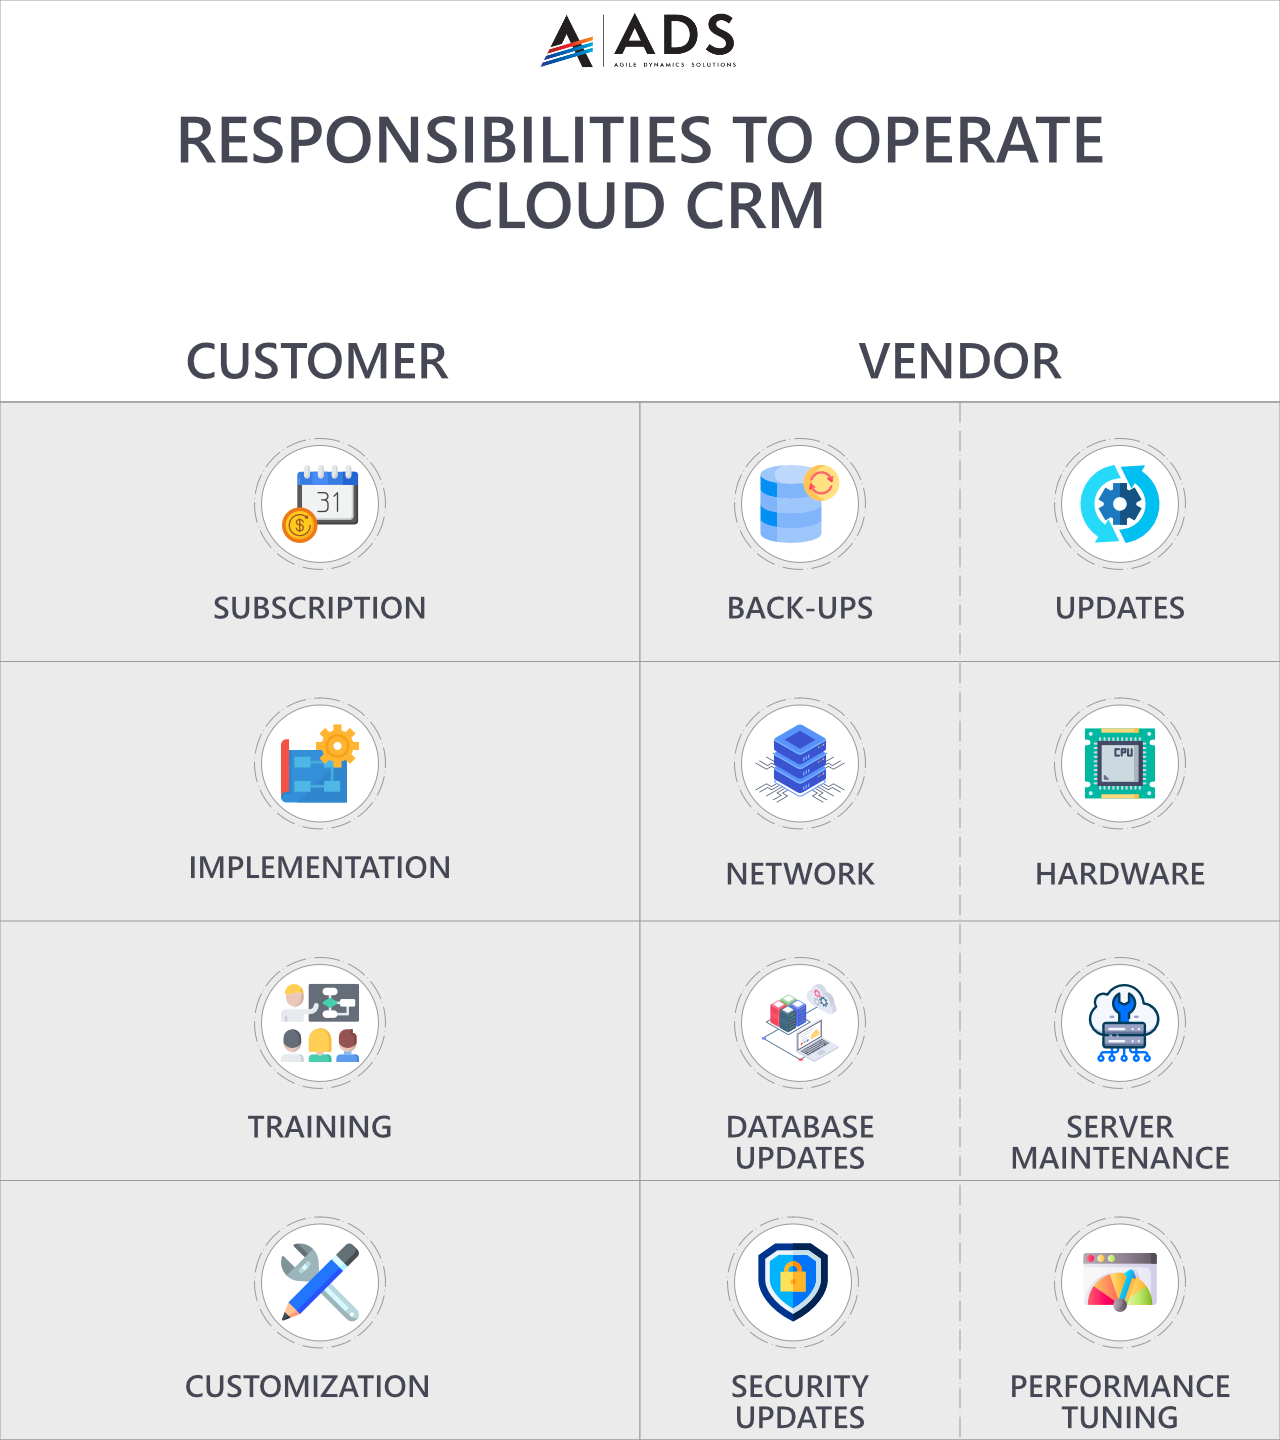 customer and vendor responsibilities to operate cloud crm